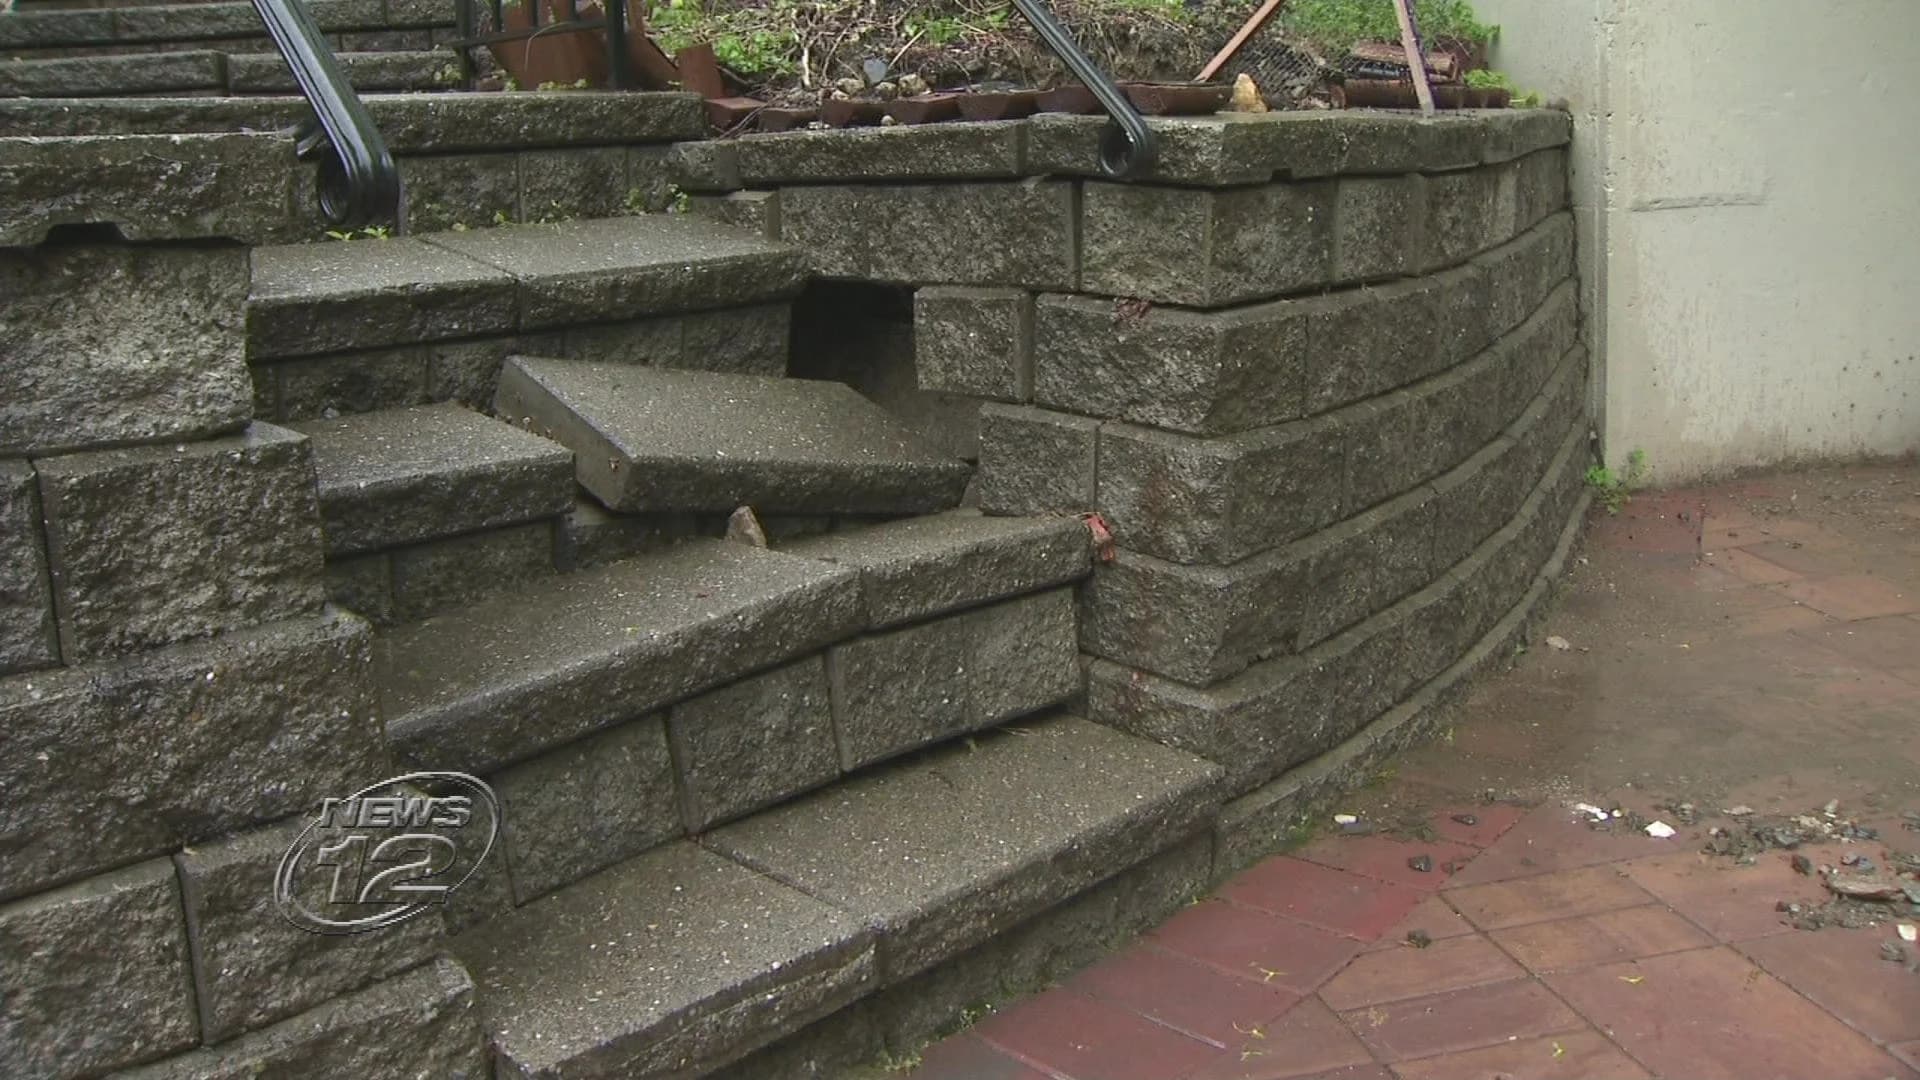 Storm drain issue may put Ardsley couple's home at risk